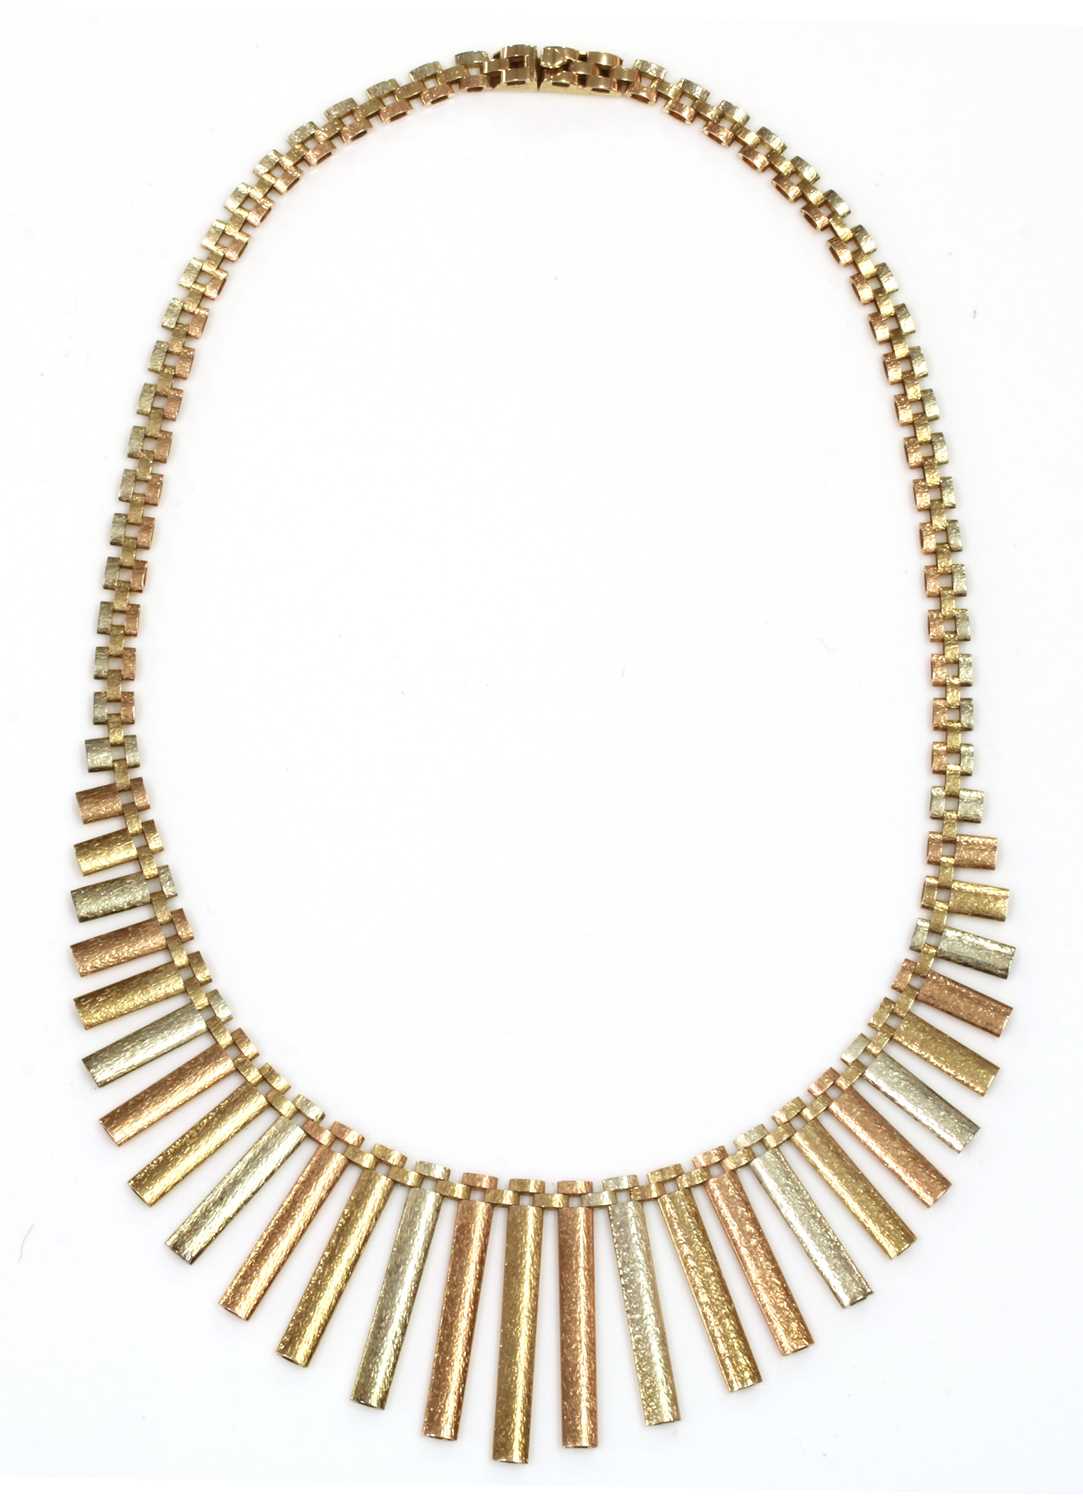 Lot 249 - A 9ct three colour gold 'Cleopatra' style necklace, by Wristwear, c.1970